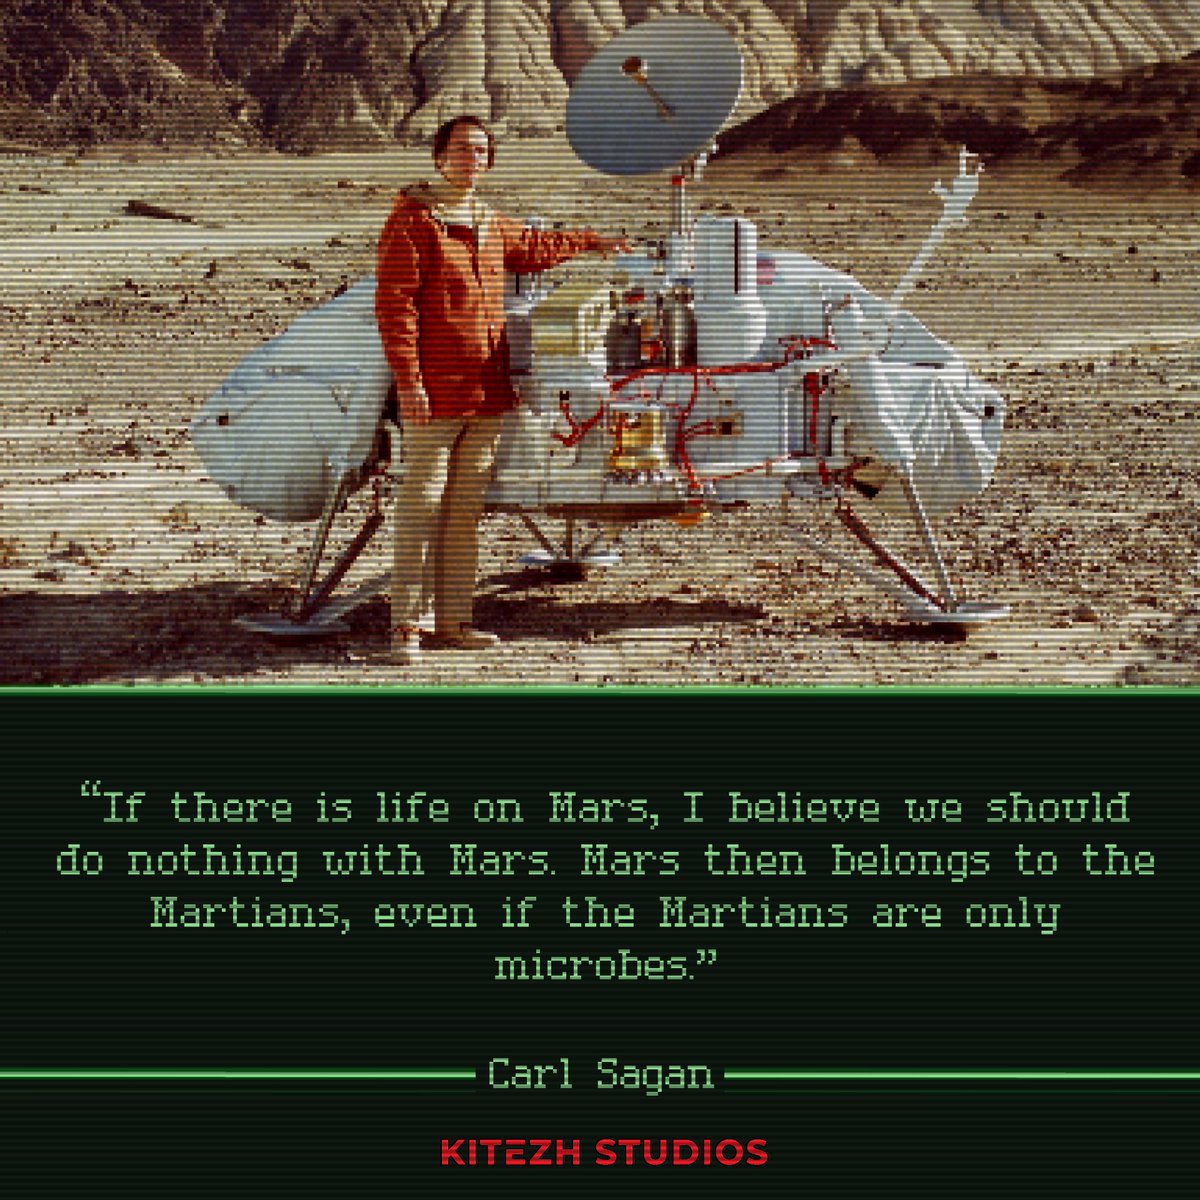 Carl Sagan was a man of a different time, where science was more open to exploration and the possibility of alien existence. 

#KitezhStudios #Space #ExtraterrestrialLife #CarlSagan #Mars #Space #AncientAliens #Палеоконтакт